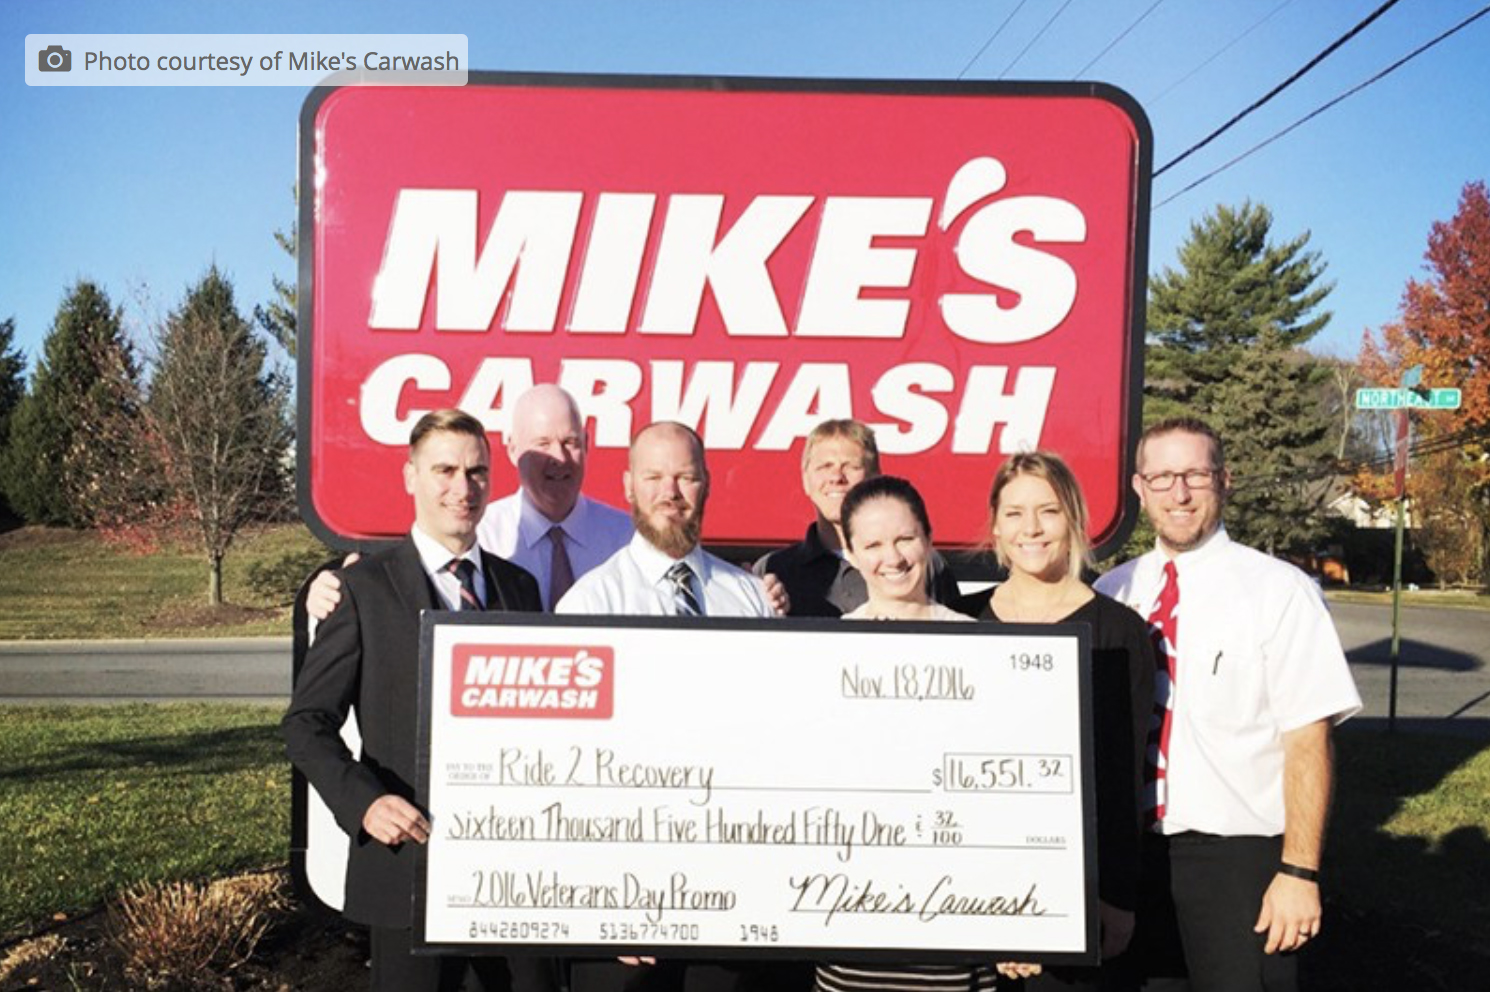 Mike’s Carwash raises 16.5K for Ride 2 Recovery